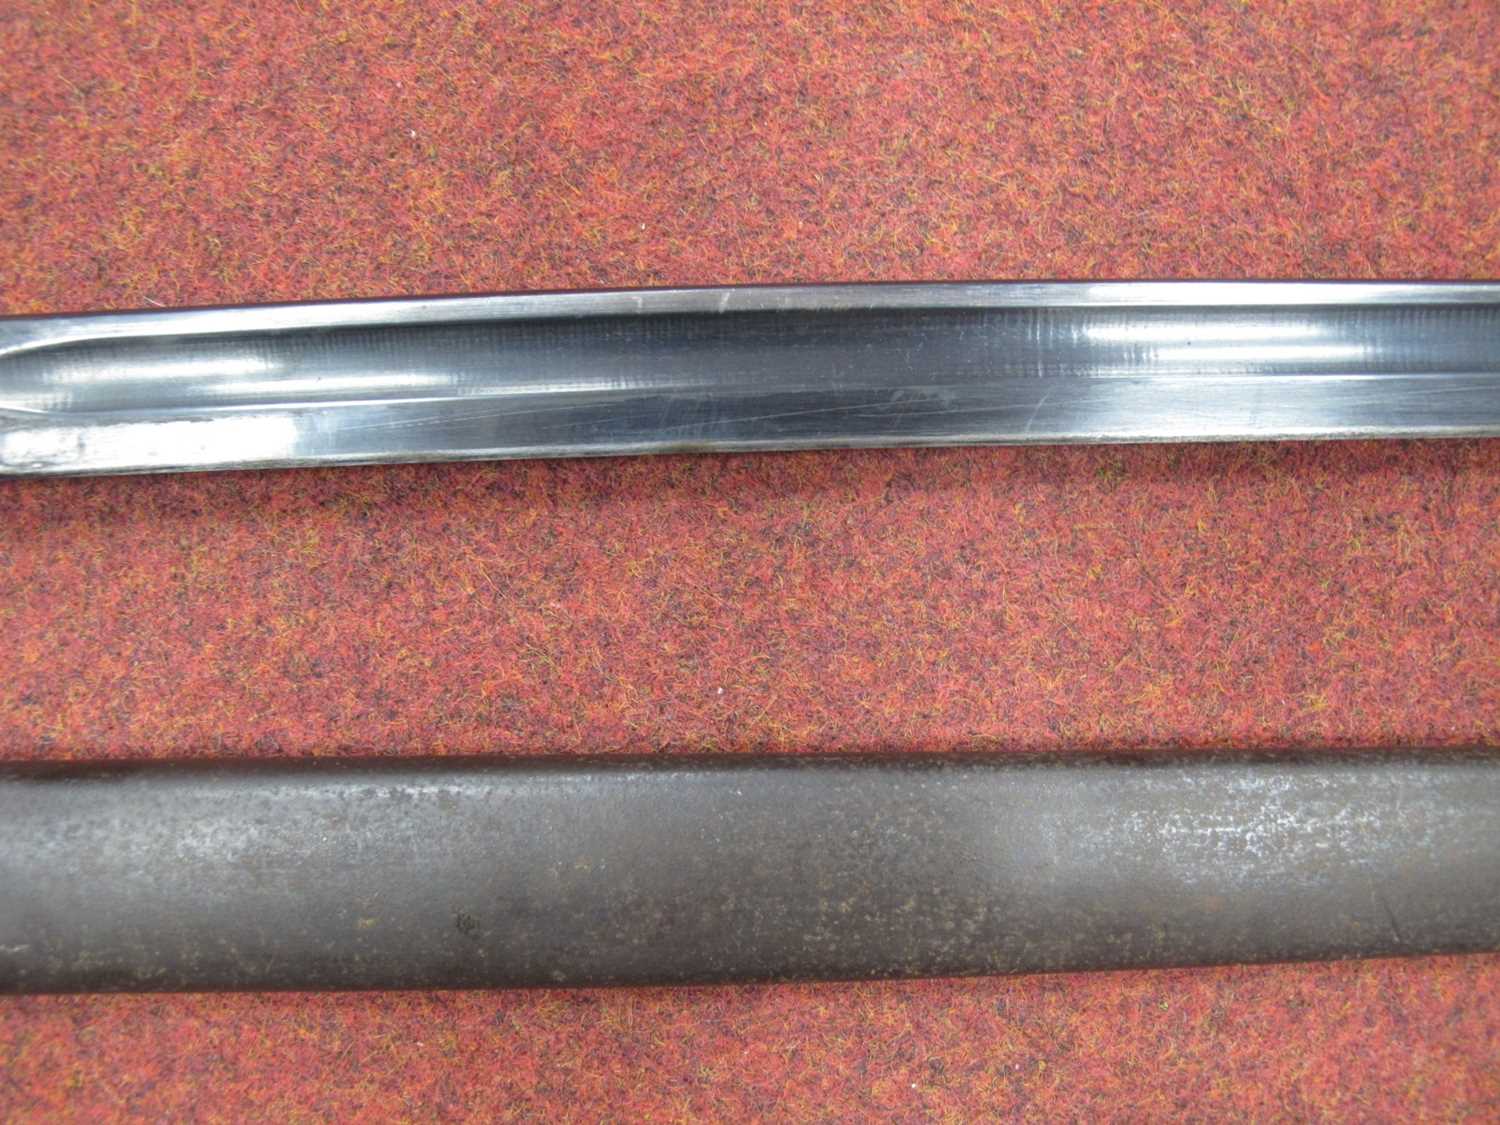 WWII Australian 1907 Pattern Bayonet, with various marks on blade including Year '42', - Image 5 of 11